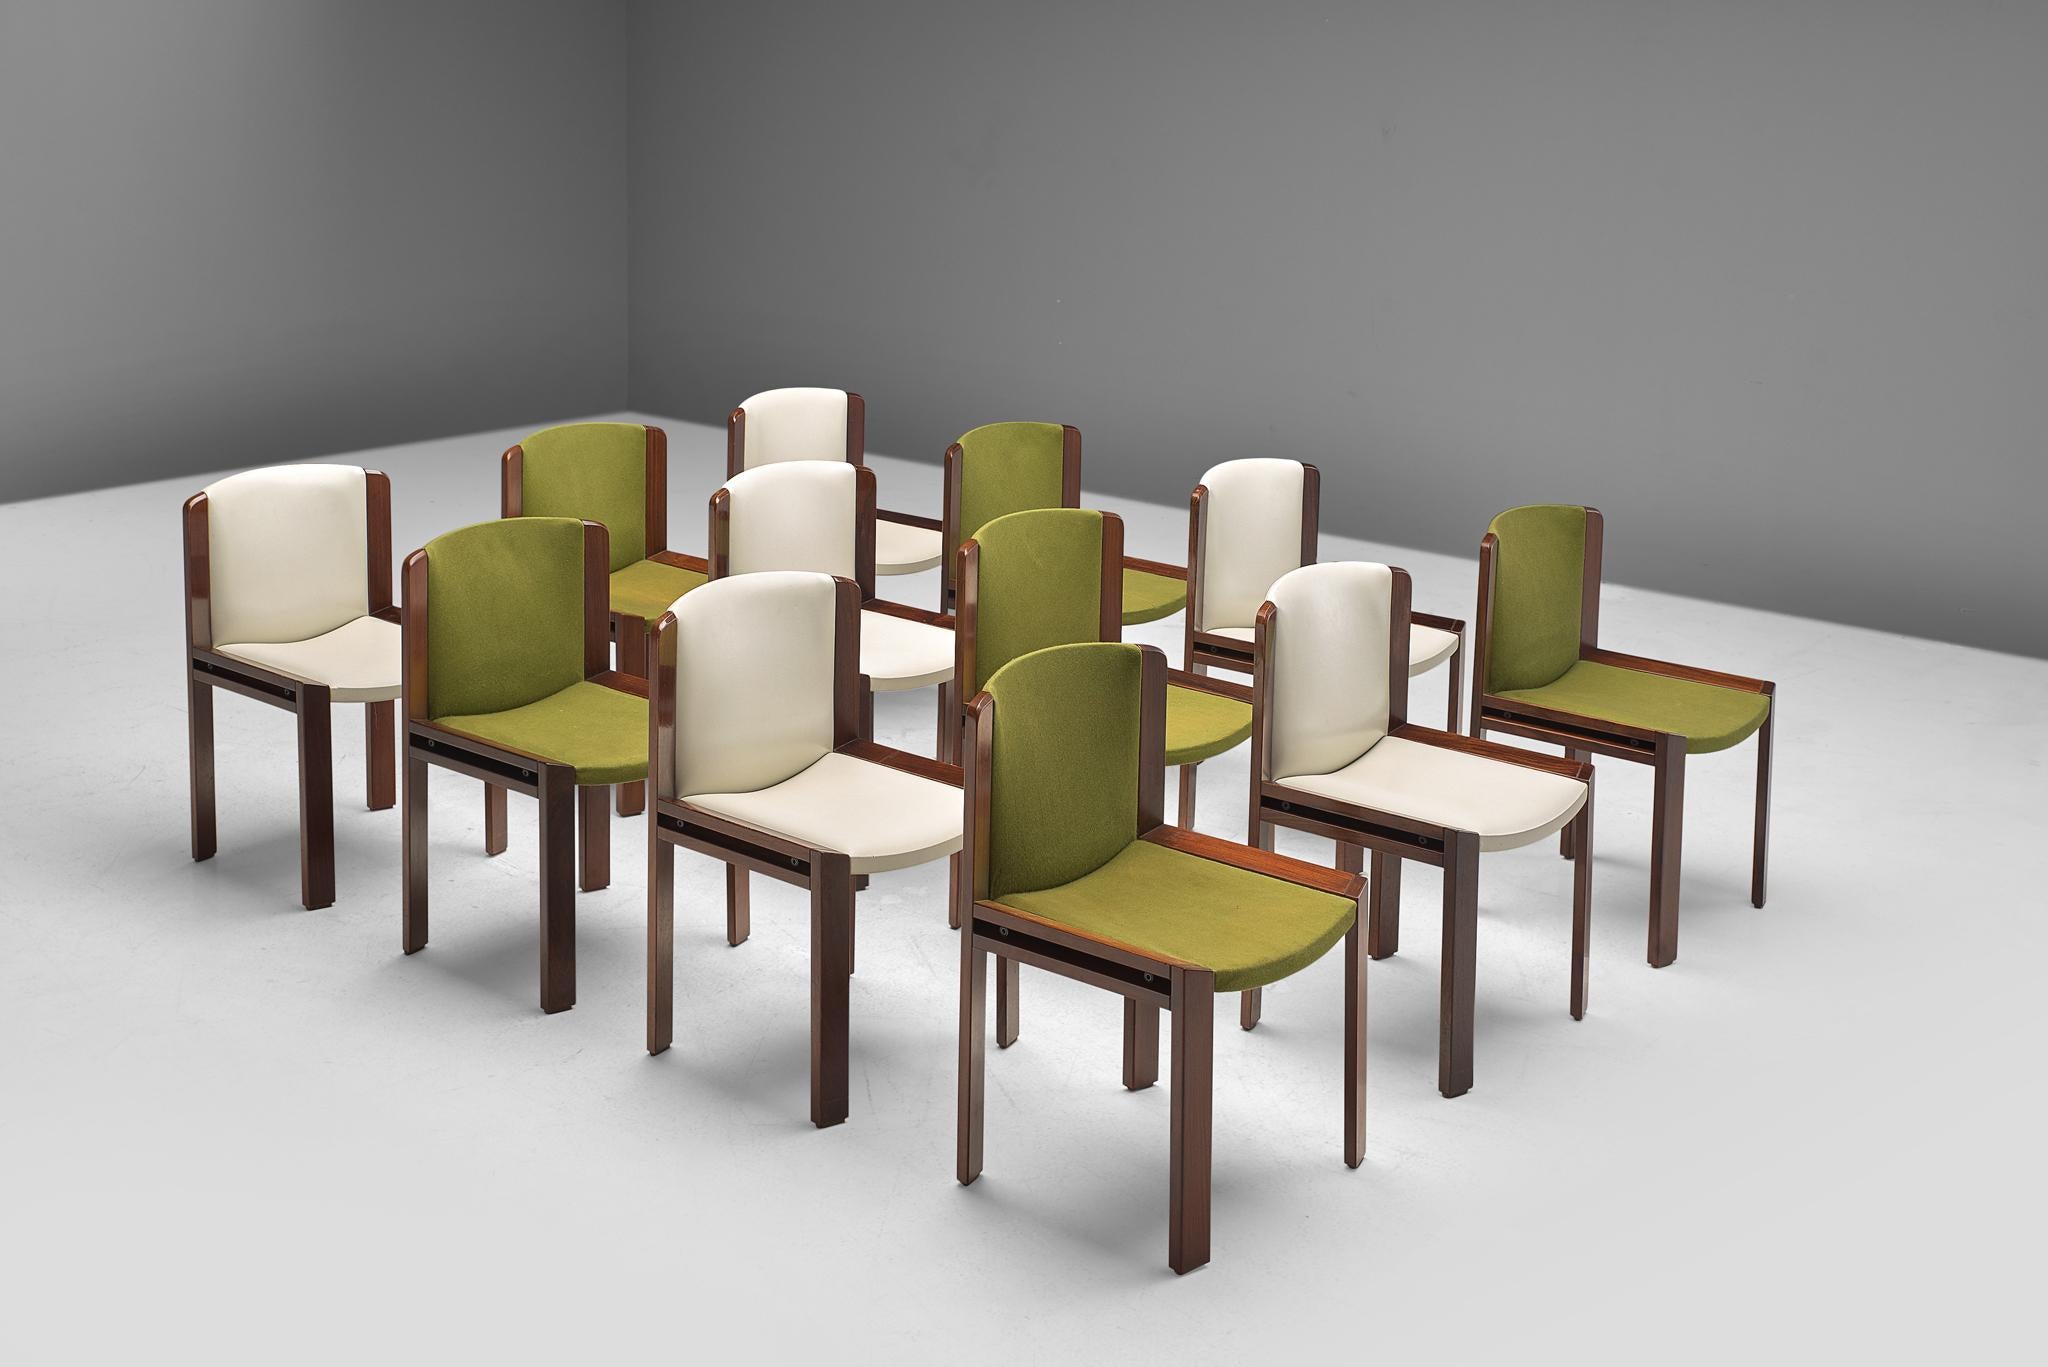 Joe Colombo for Pozzi, 12 dining chairs model '300', green fabric and white leather and stained oak, Italy, 1966. 

Functionalist set of dining chairs is designed by Joe Colombo in 1966. His fascination with functionality meant he always focused on